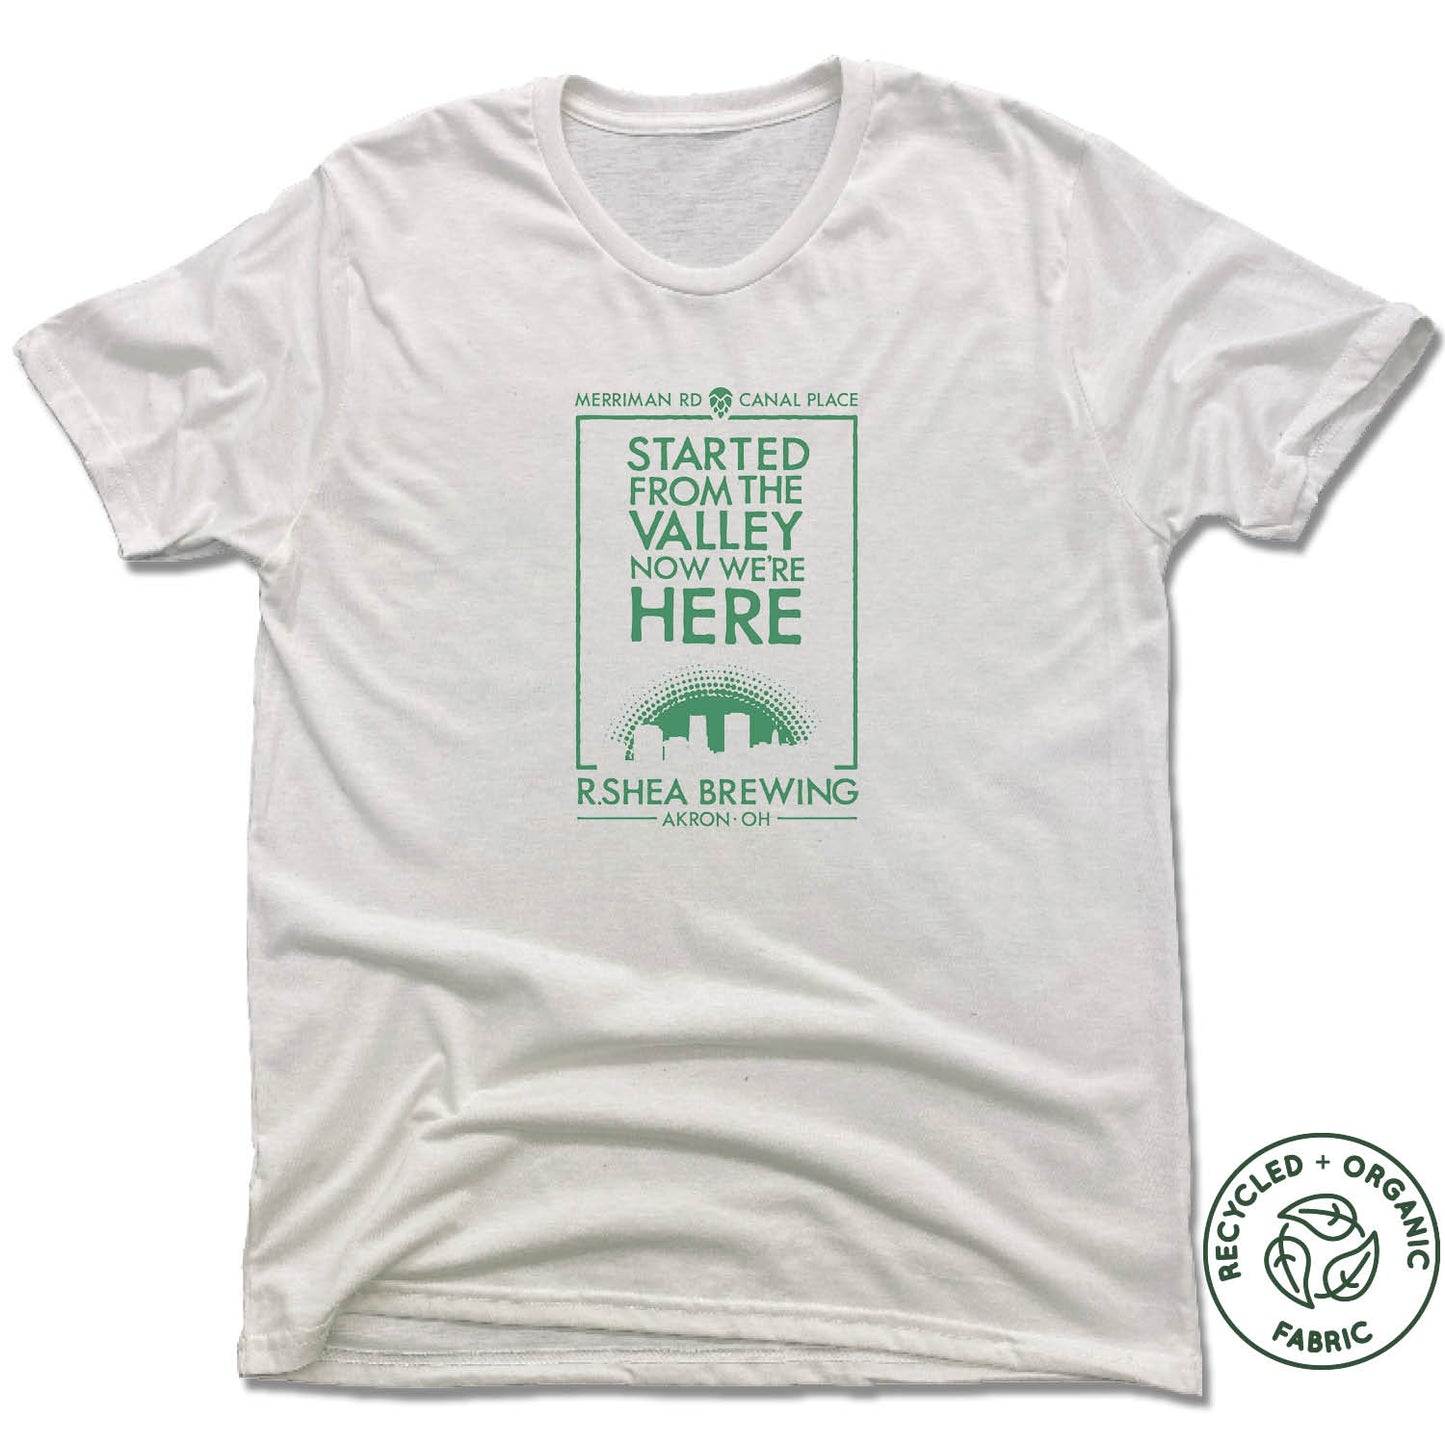 R. SHEA BREWING. | UNISEX WHITE Recycled Tri-Blend | GREEN LOGO